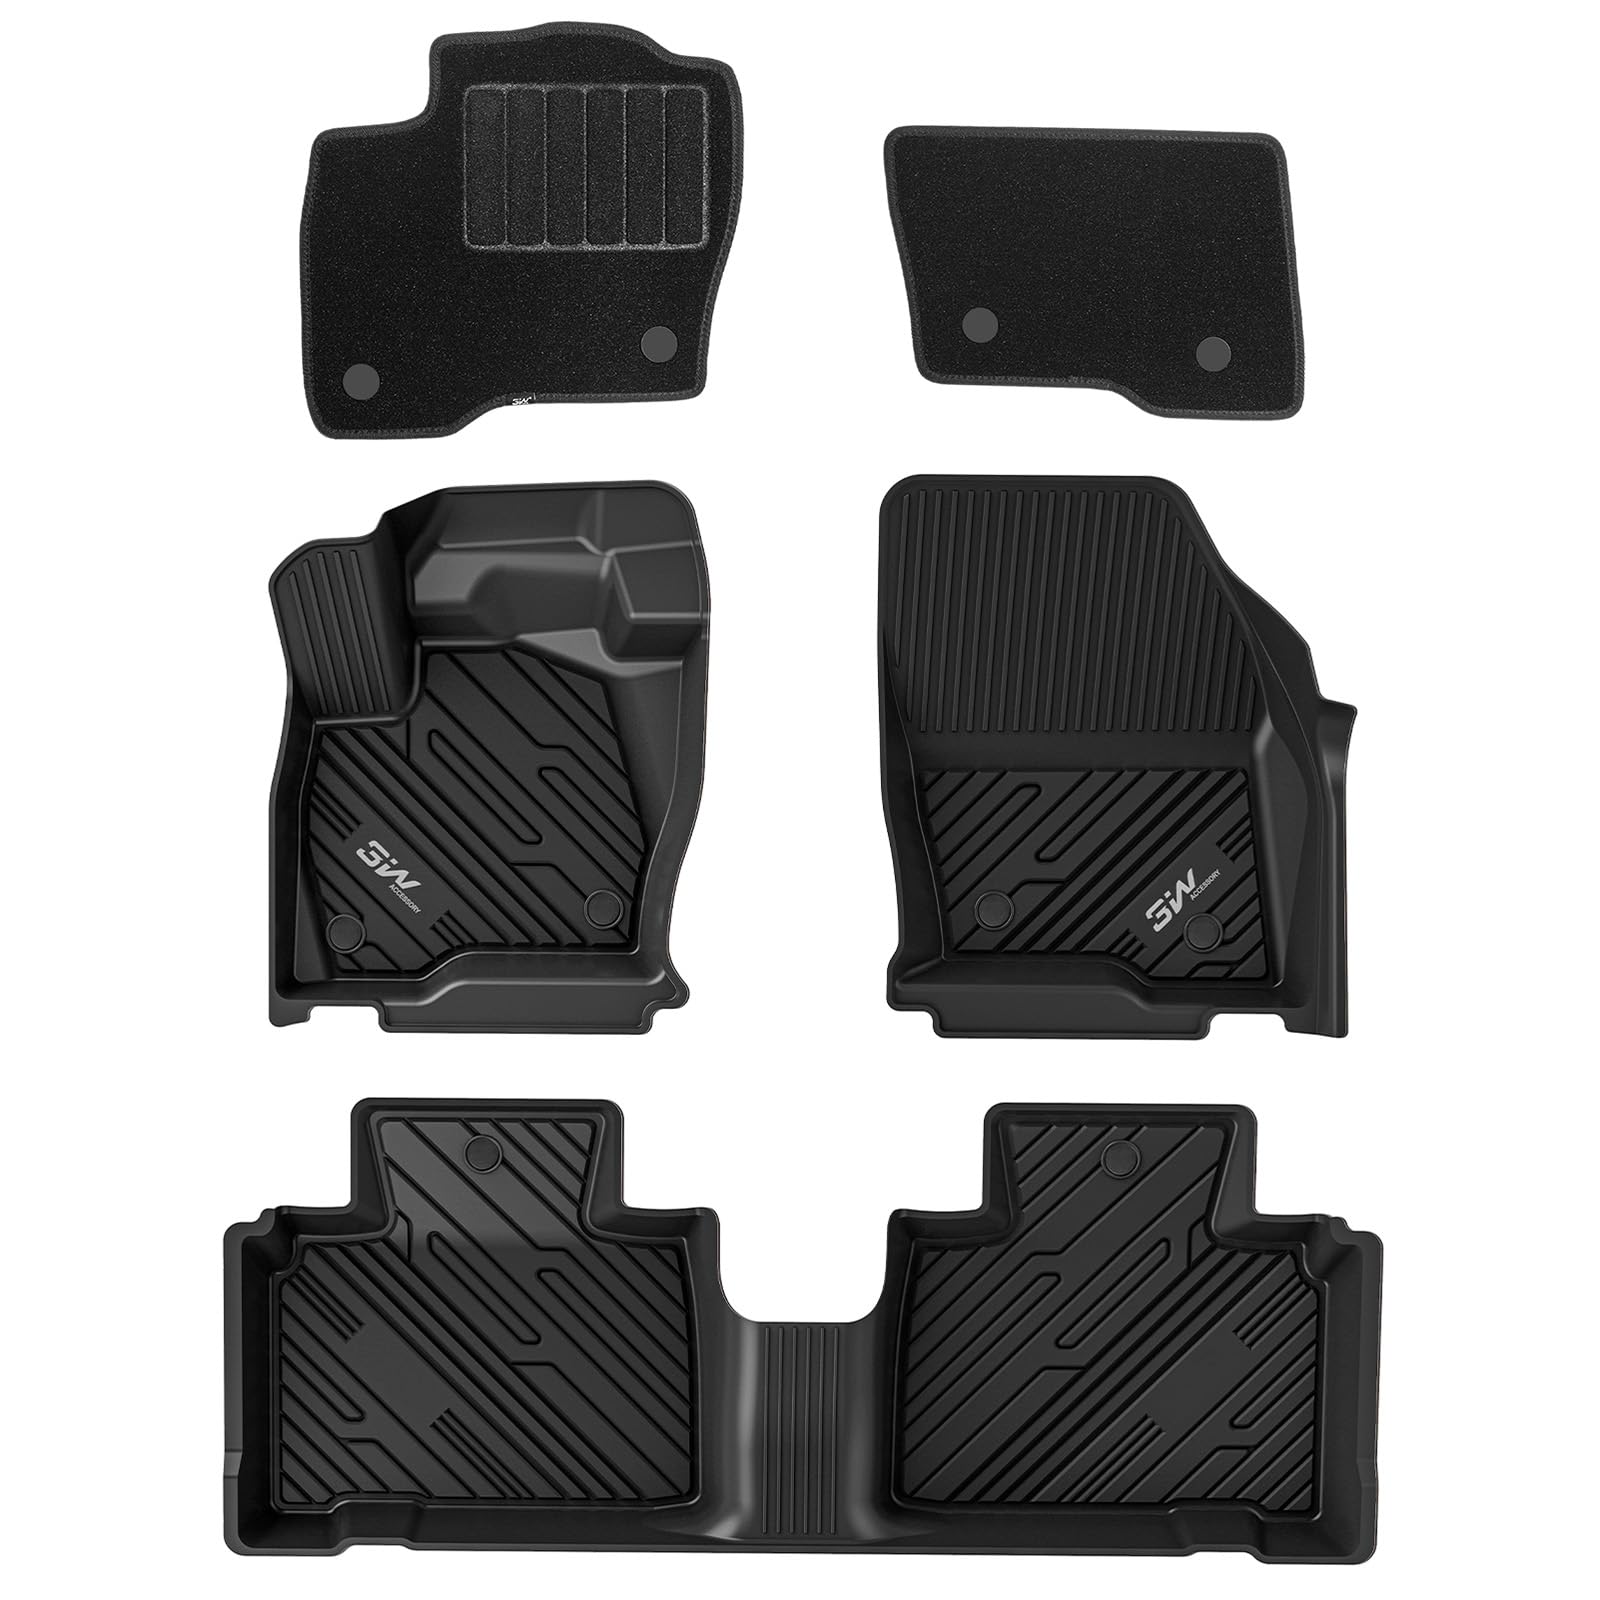 3W Ford Edge 2015-2024 Custom Floor Mats TPE Material & All-Weather Protection Vehicles & Parts 3W 2015-2024 Edge 2015-2024 1st&2nd Row Mats with Front Carpet